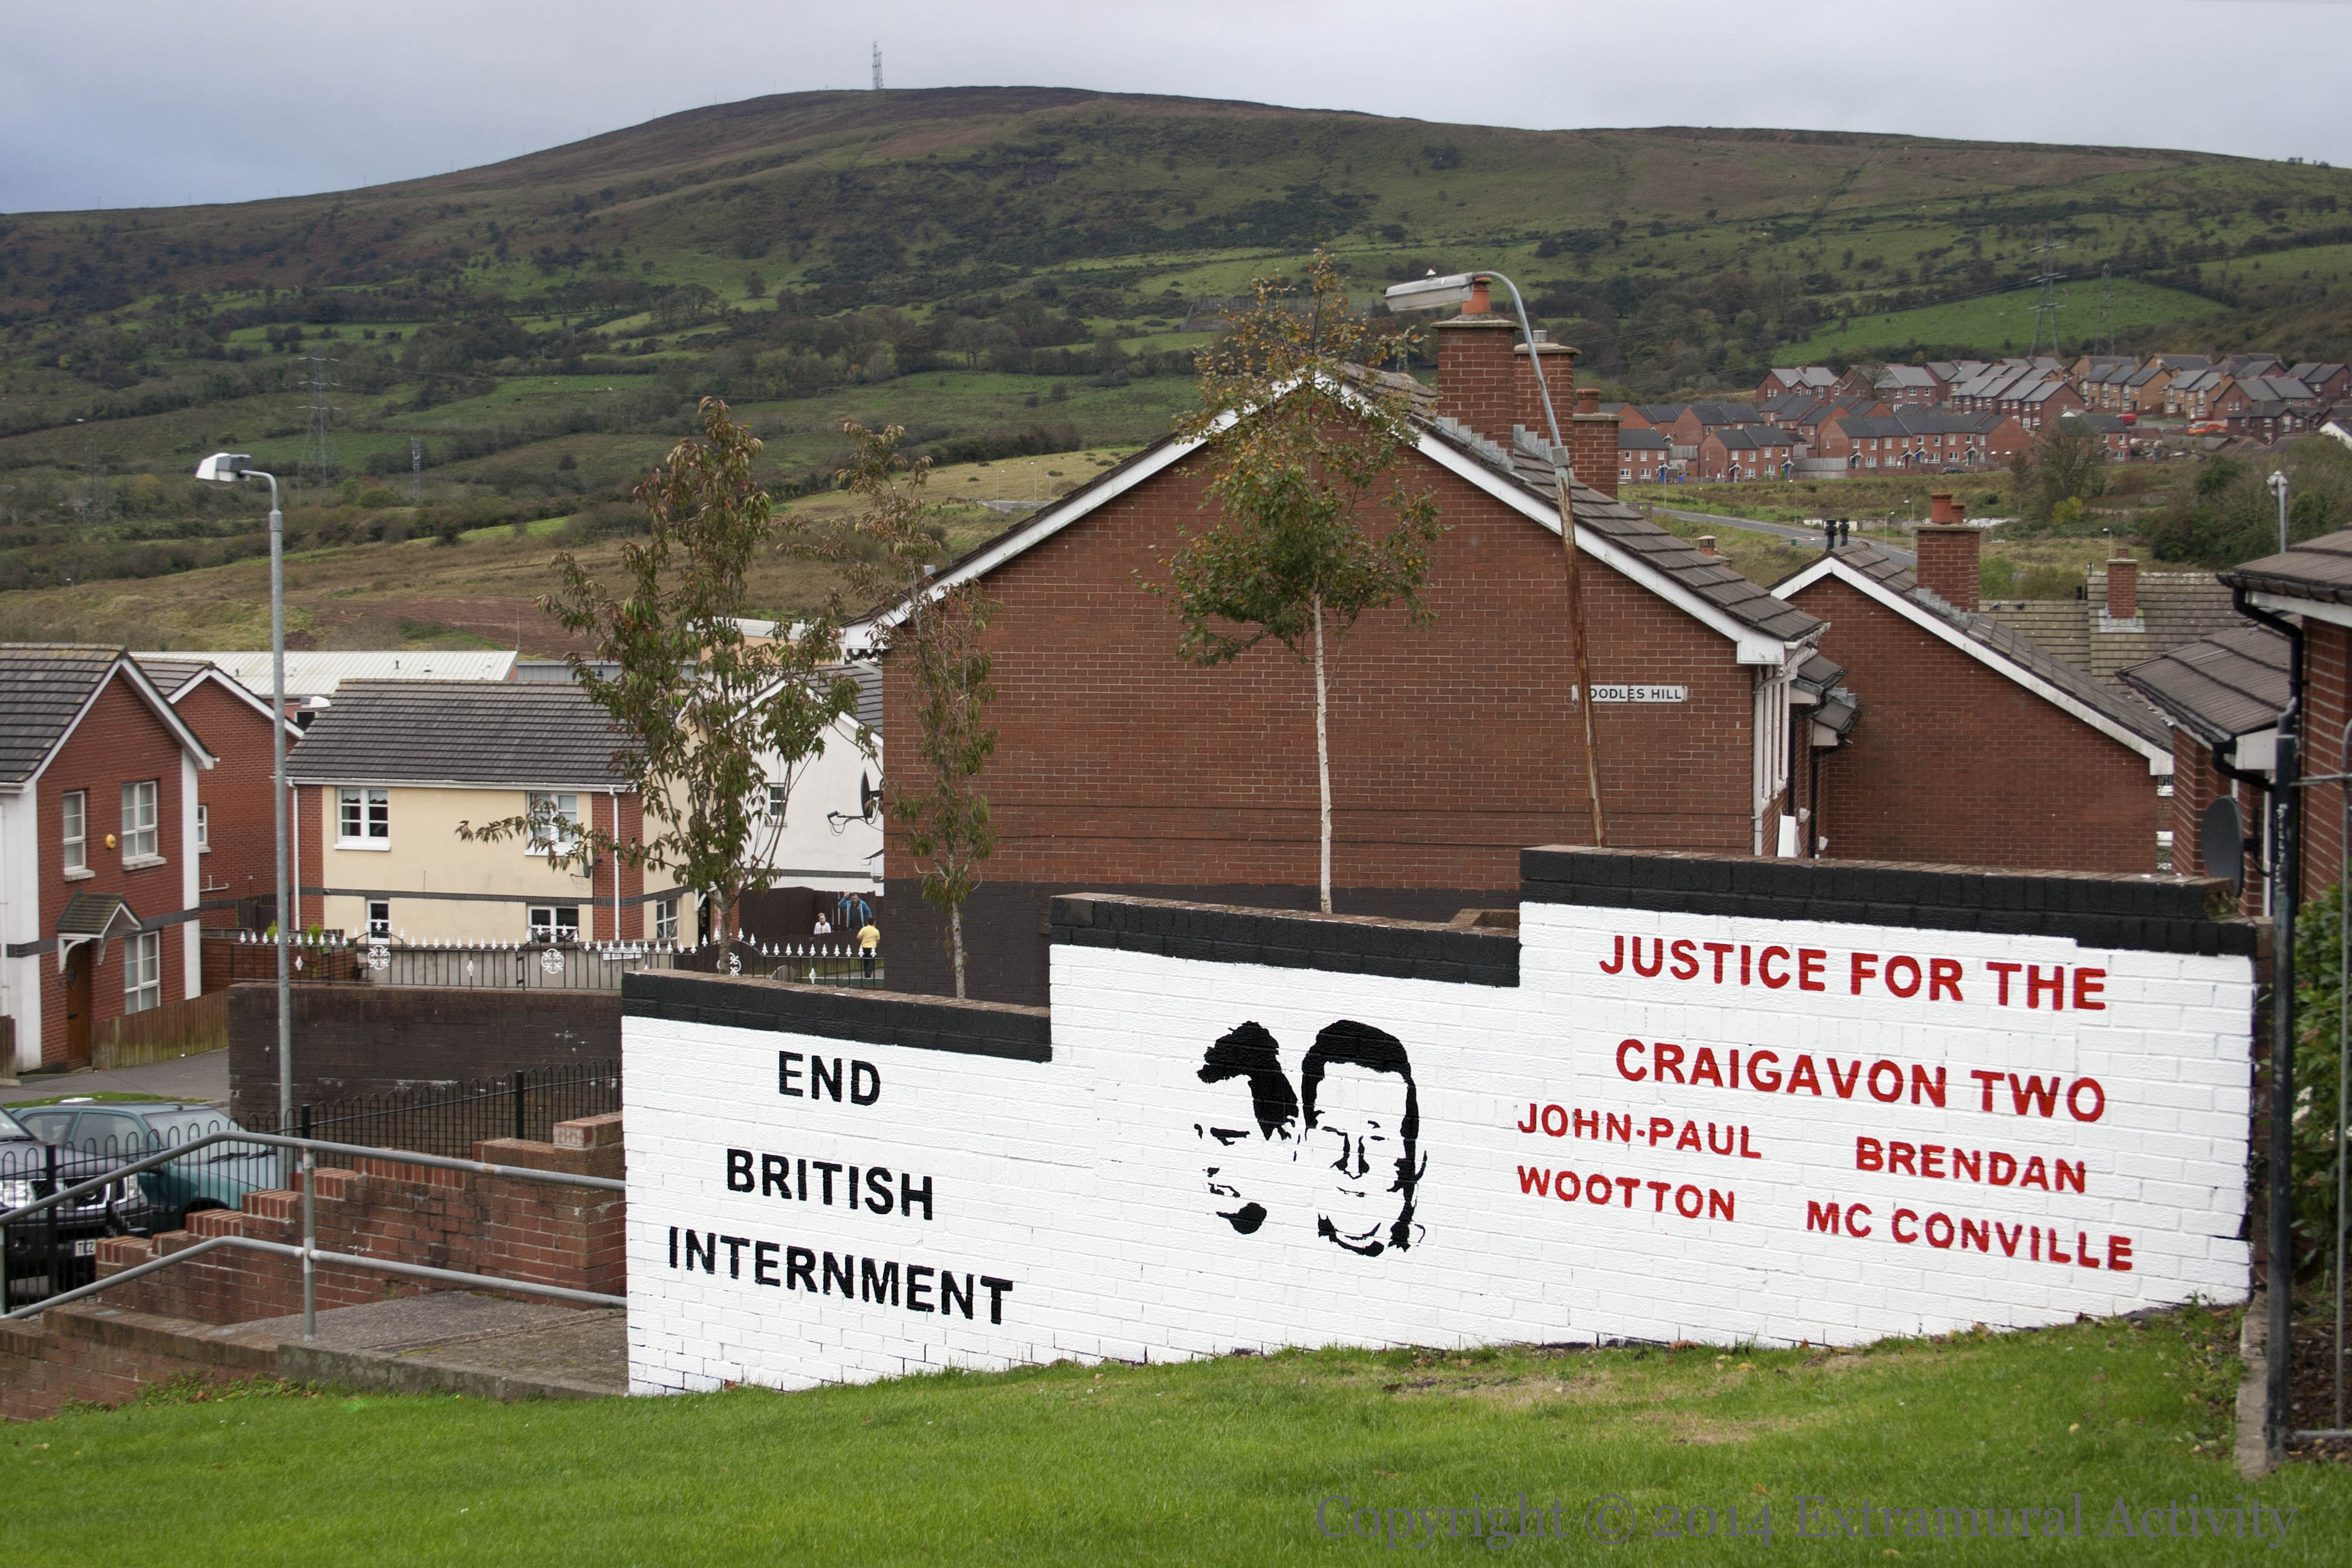 JFTC2 - Justice for the Craigavon 2